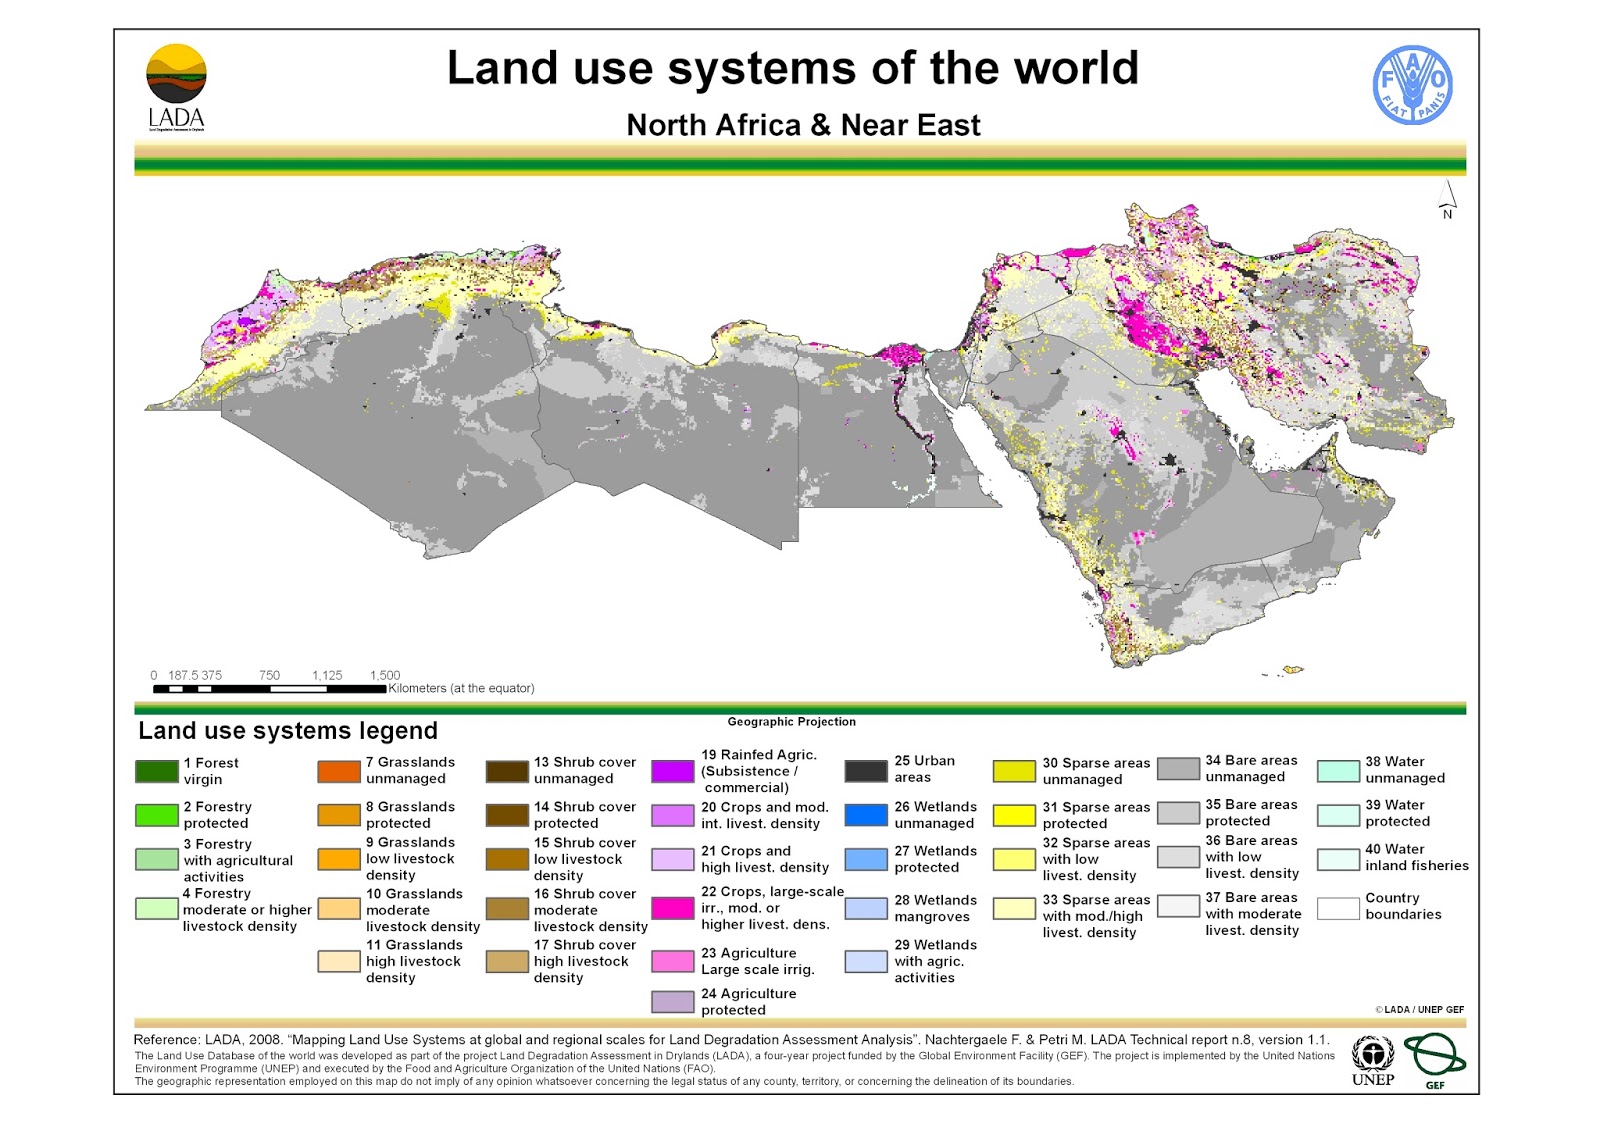 North Africa: Land use map